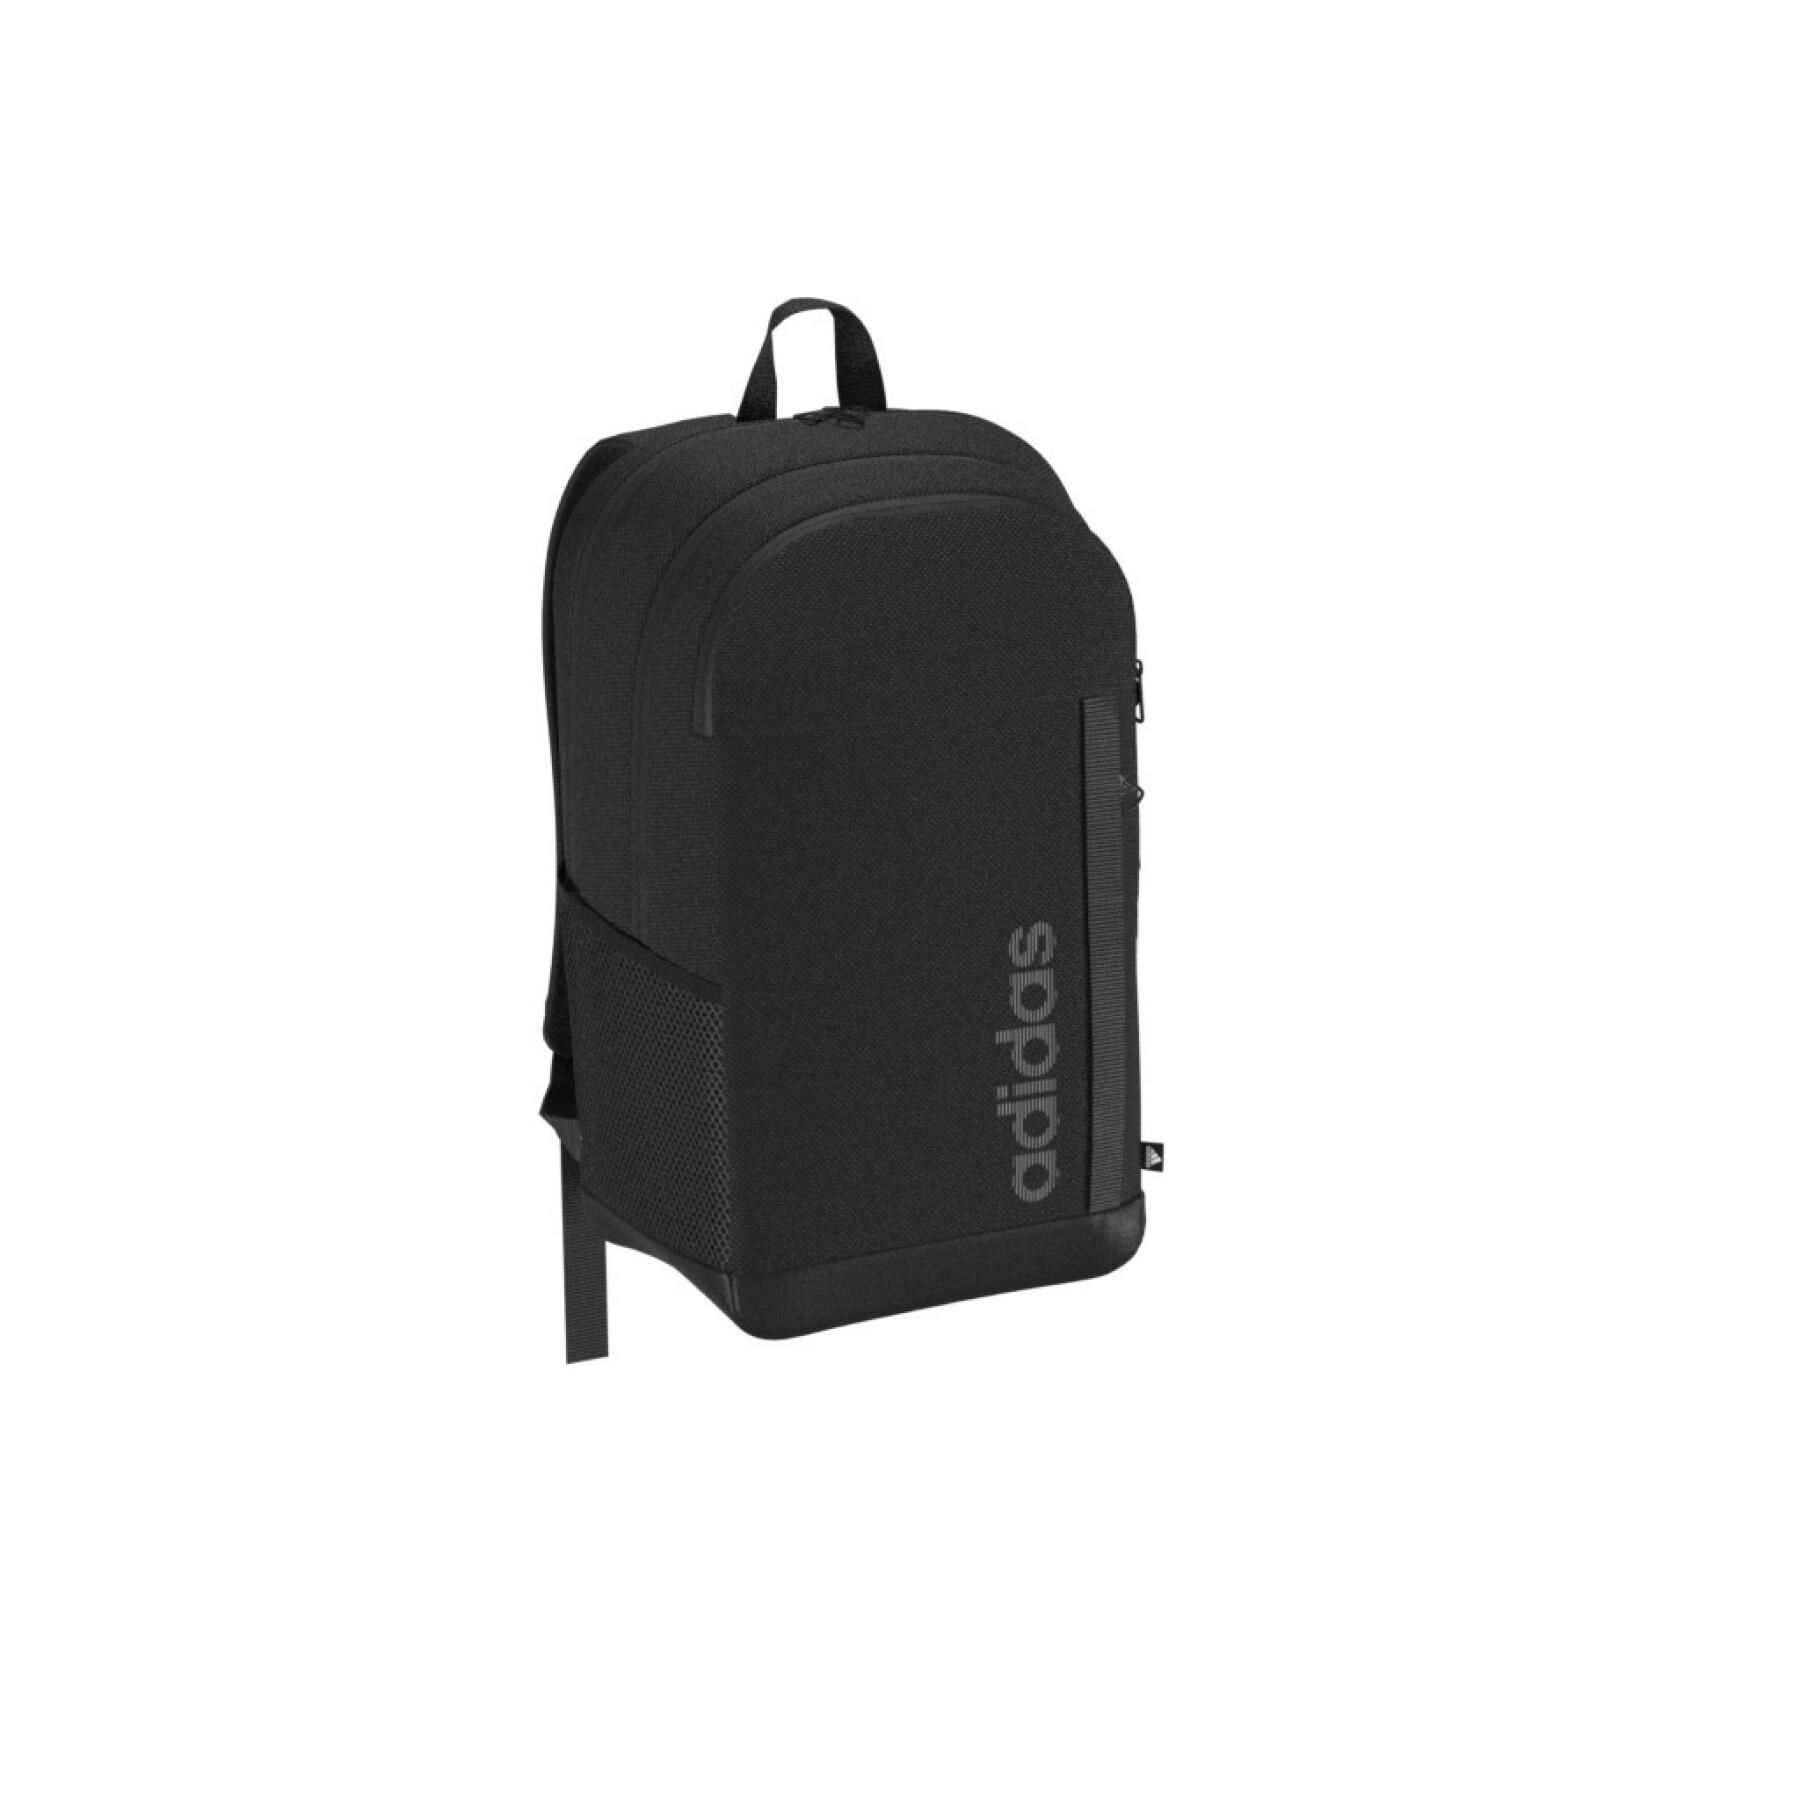 Backpack for linear movement adidas